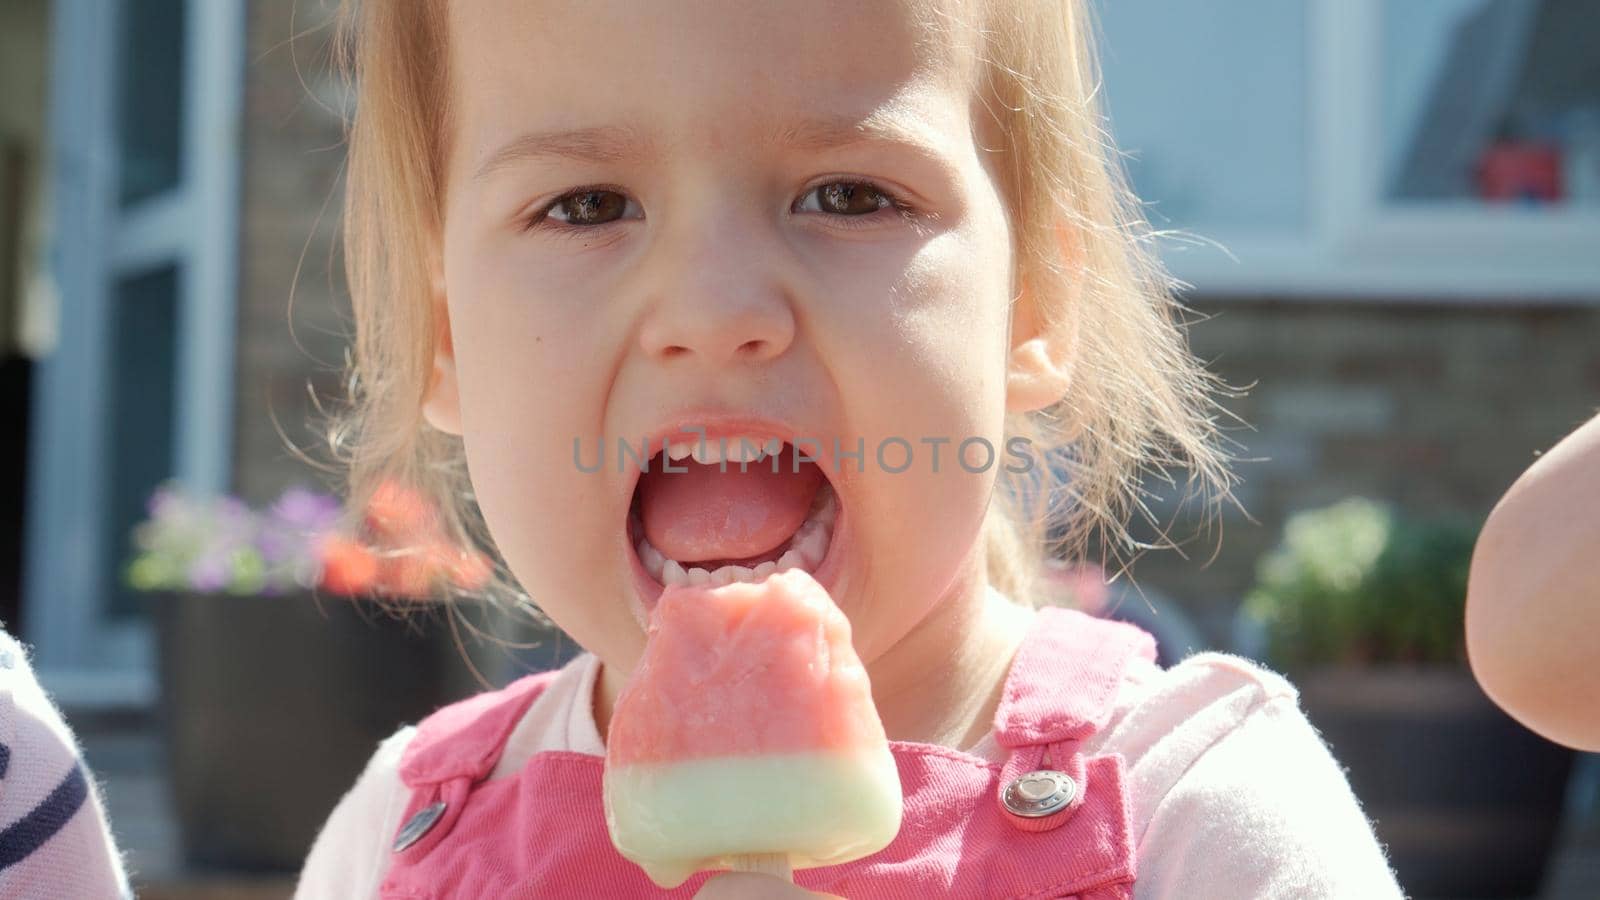 Close up portrait Girl enjoys delicious ice cream cone. Child eating watermelon popsicle. Kids Siblings snack sweets in Home Garden. Summer holiday Hot weather Sunny Day. Childhood, Food Candy Friends